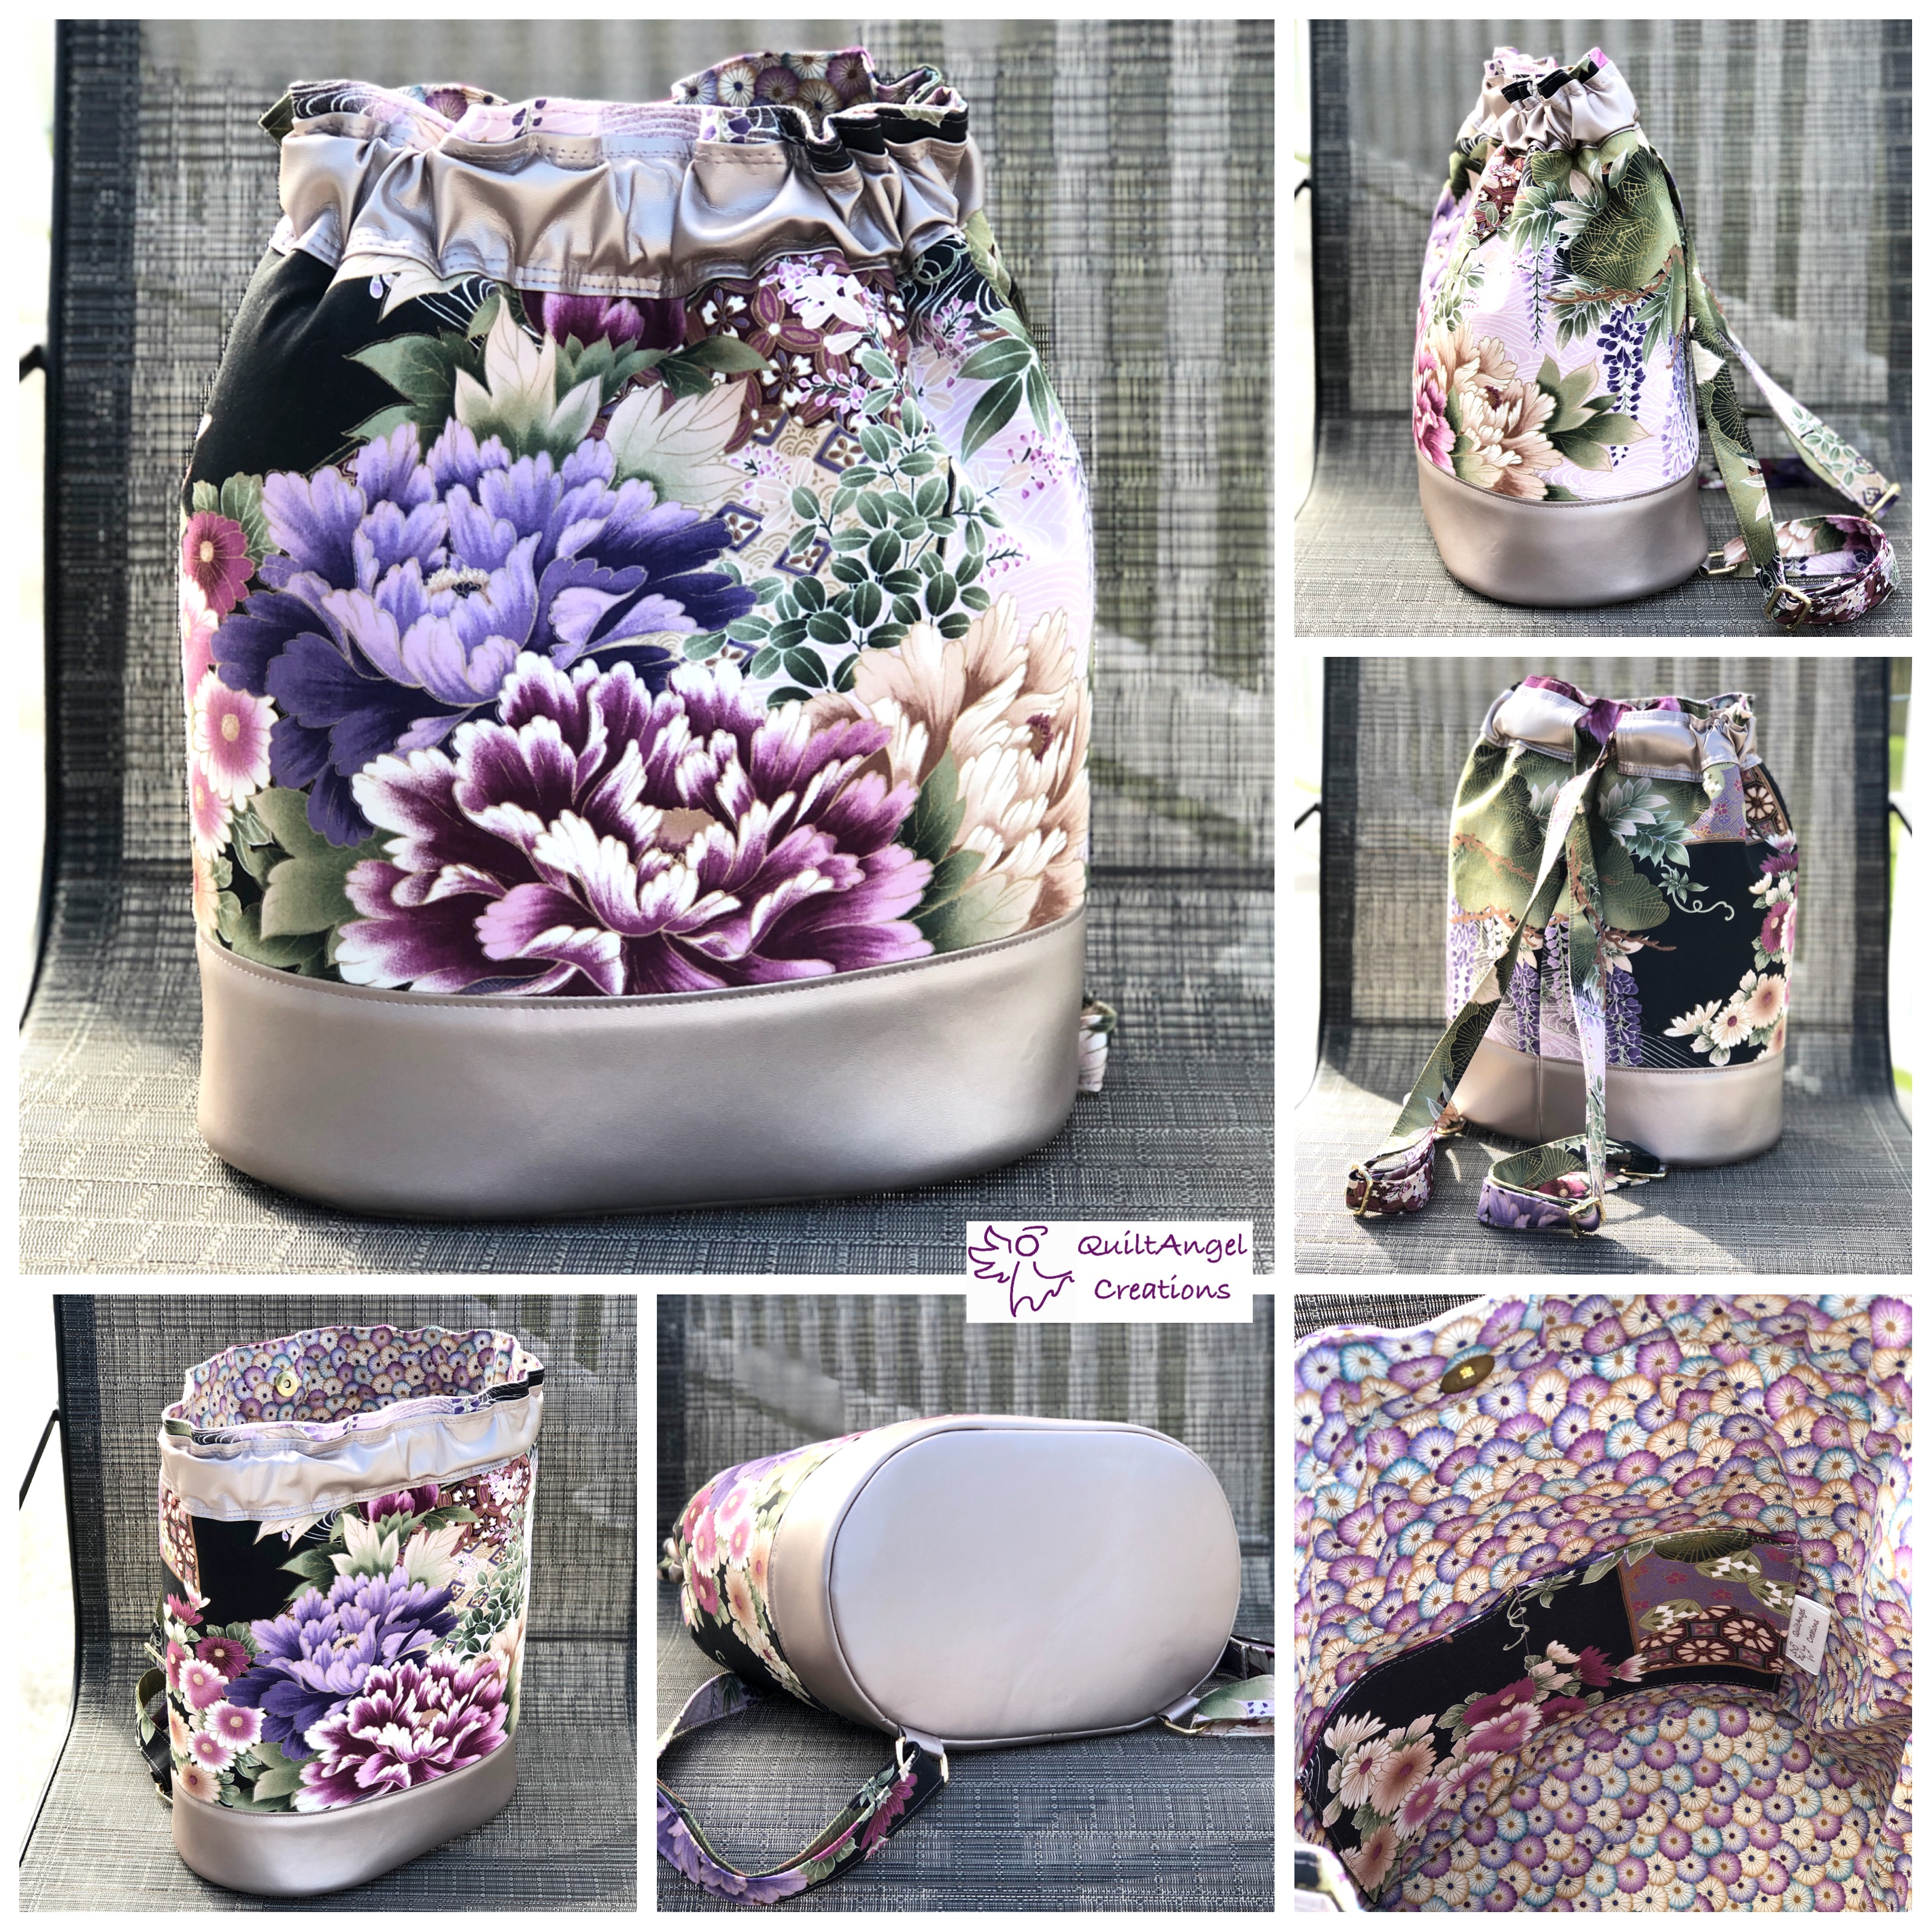 The Duffel Backpack made by Elizabeth of Quilt Angel Creations